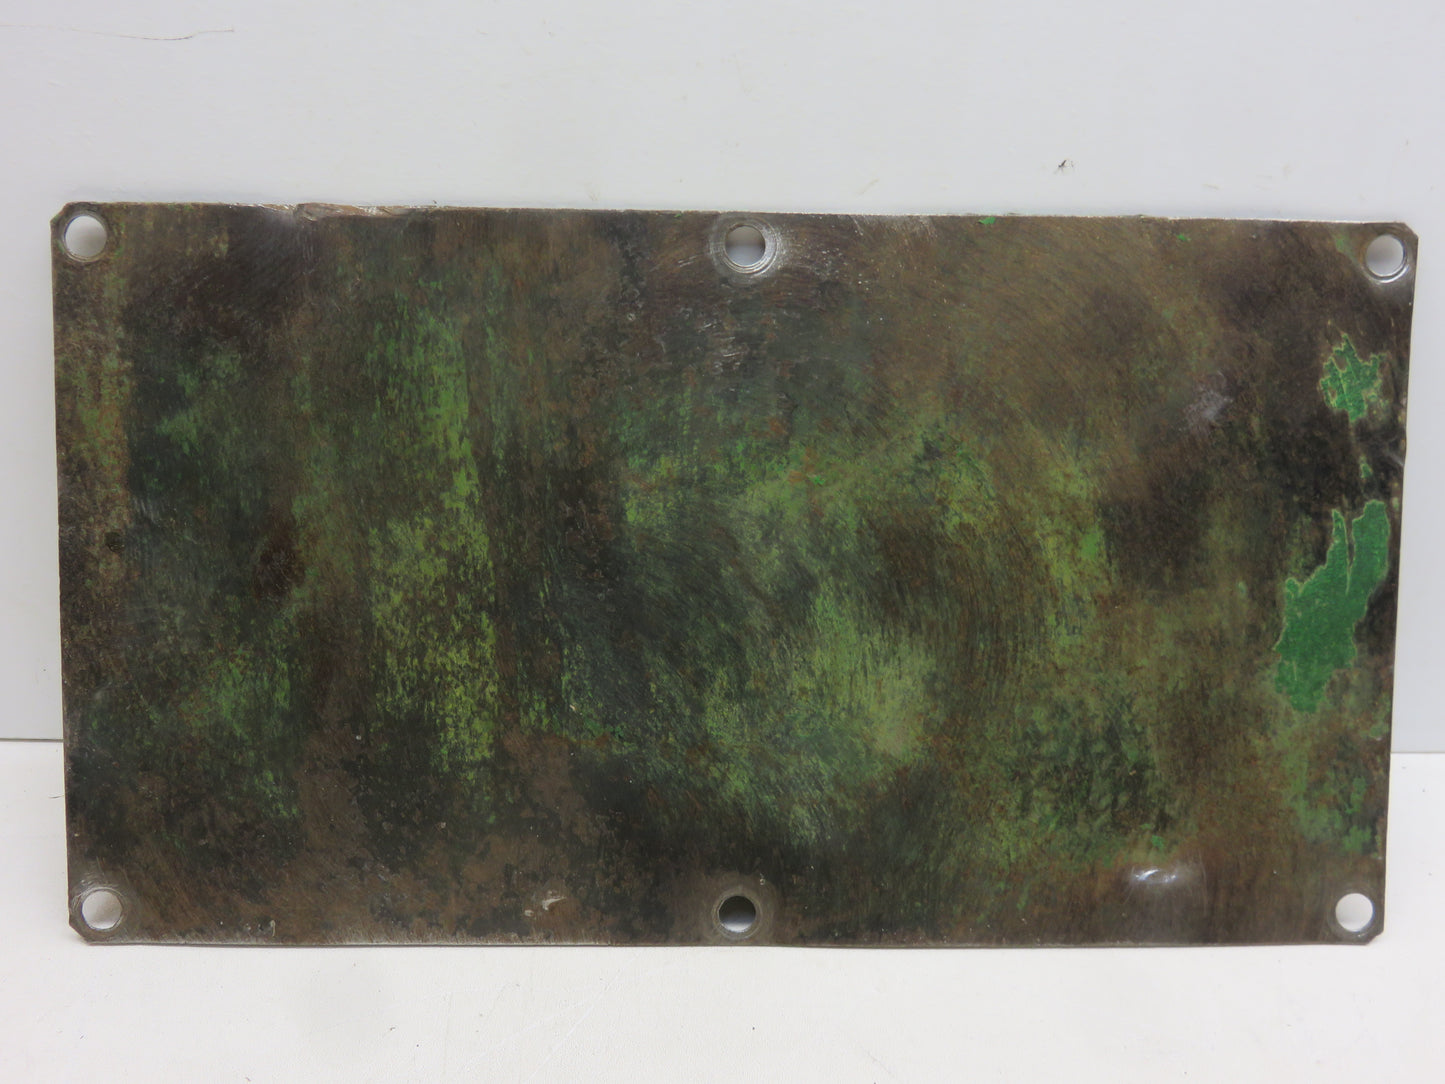 A3319R John Deere Starter Opening Cover For A, 60, 70, 620